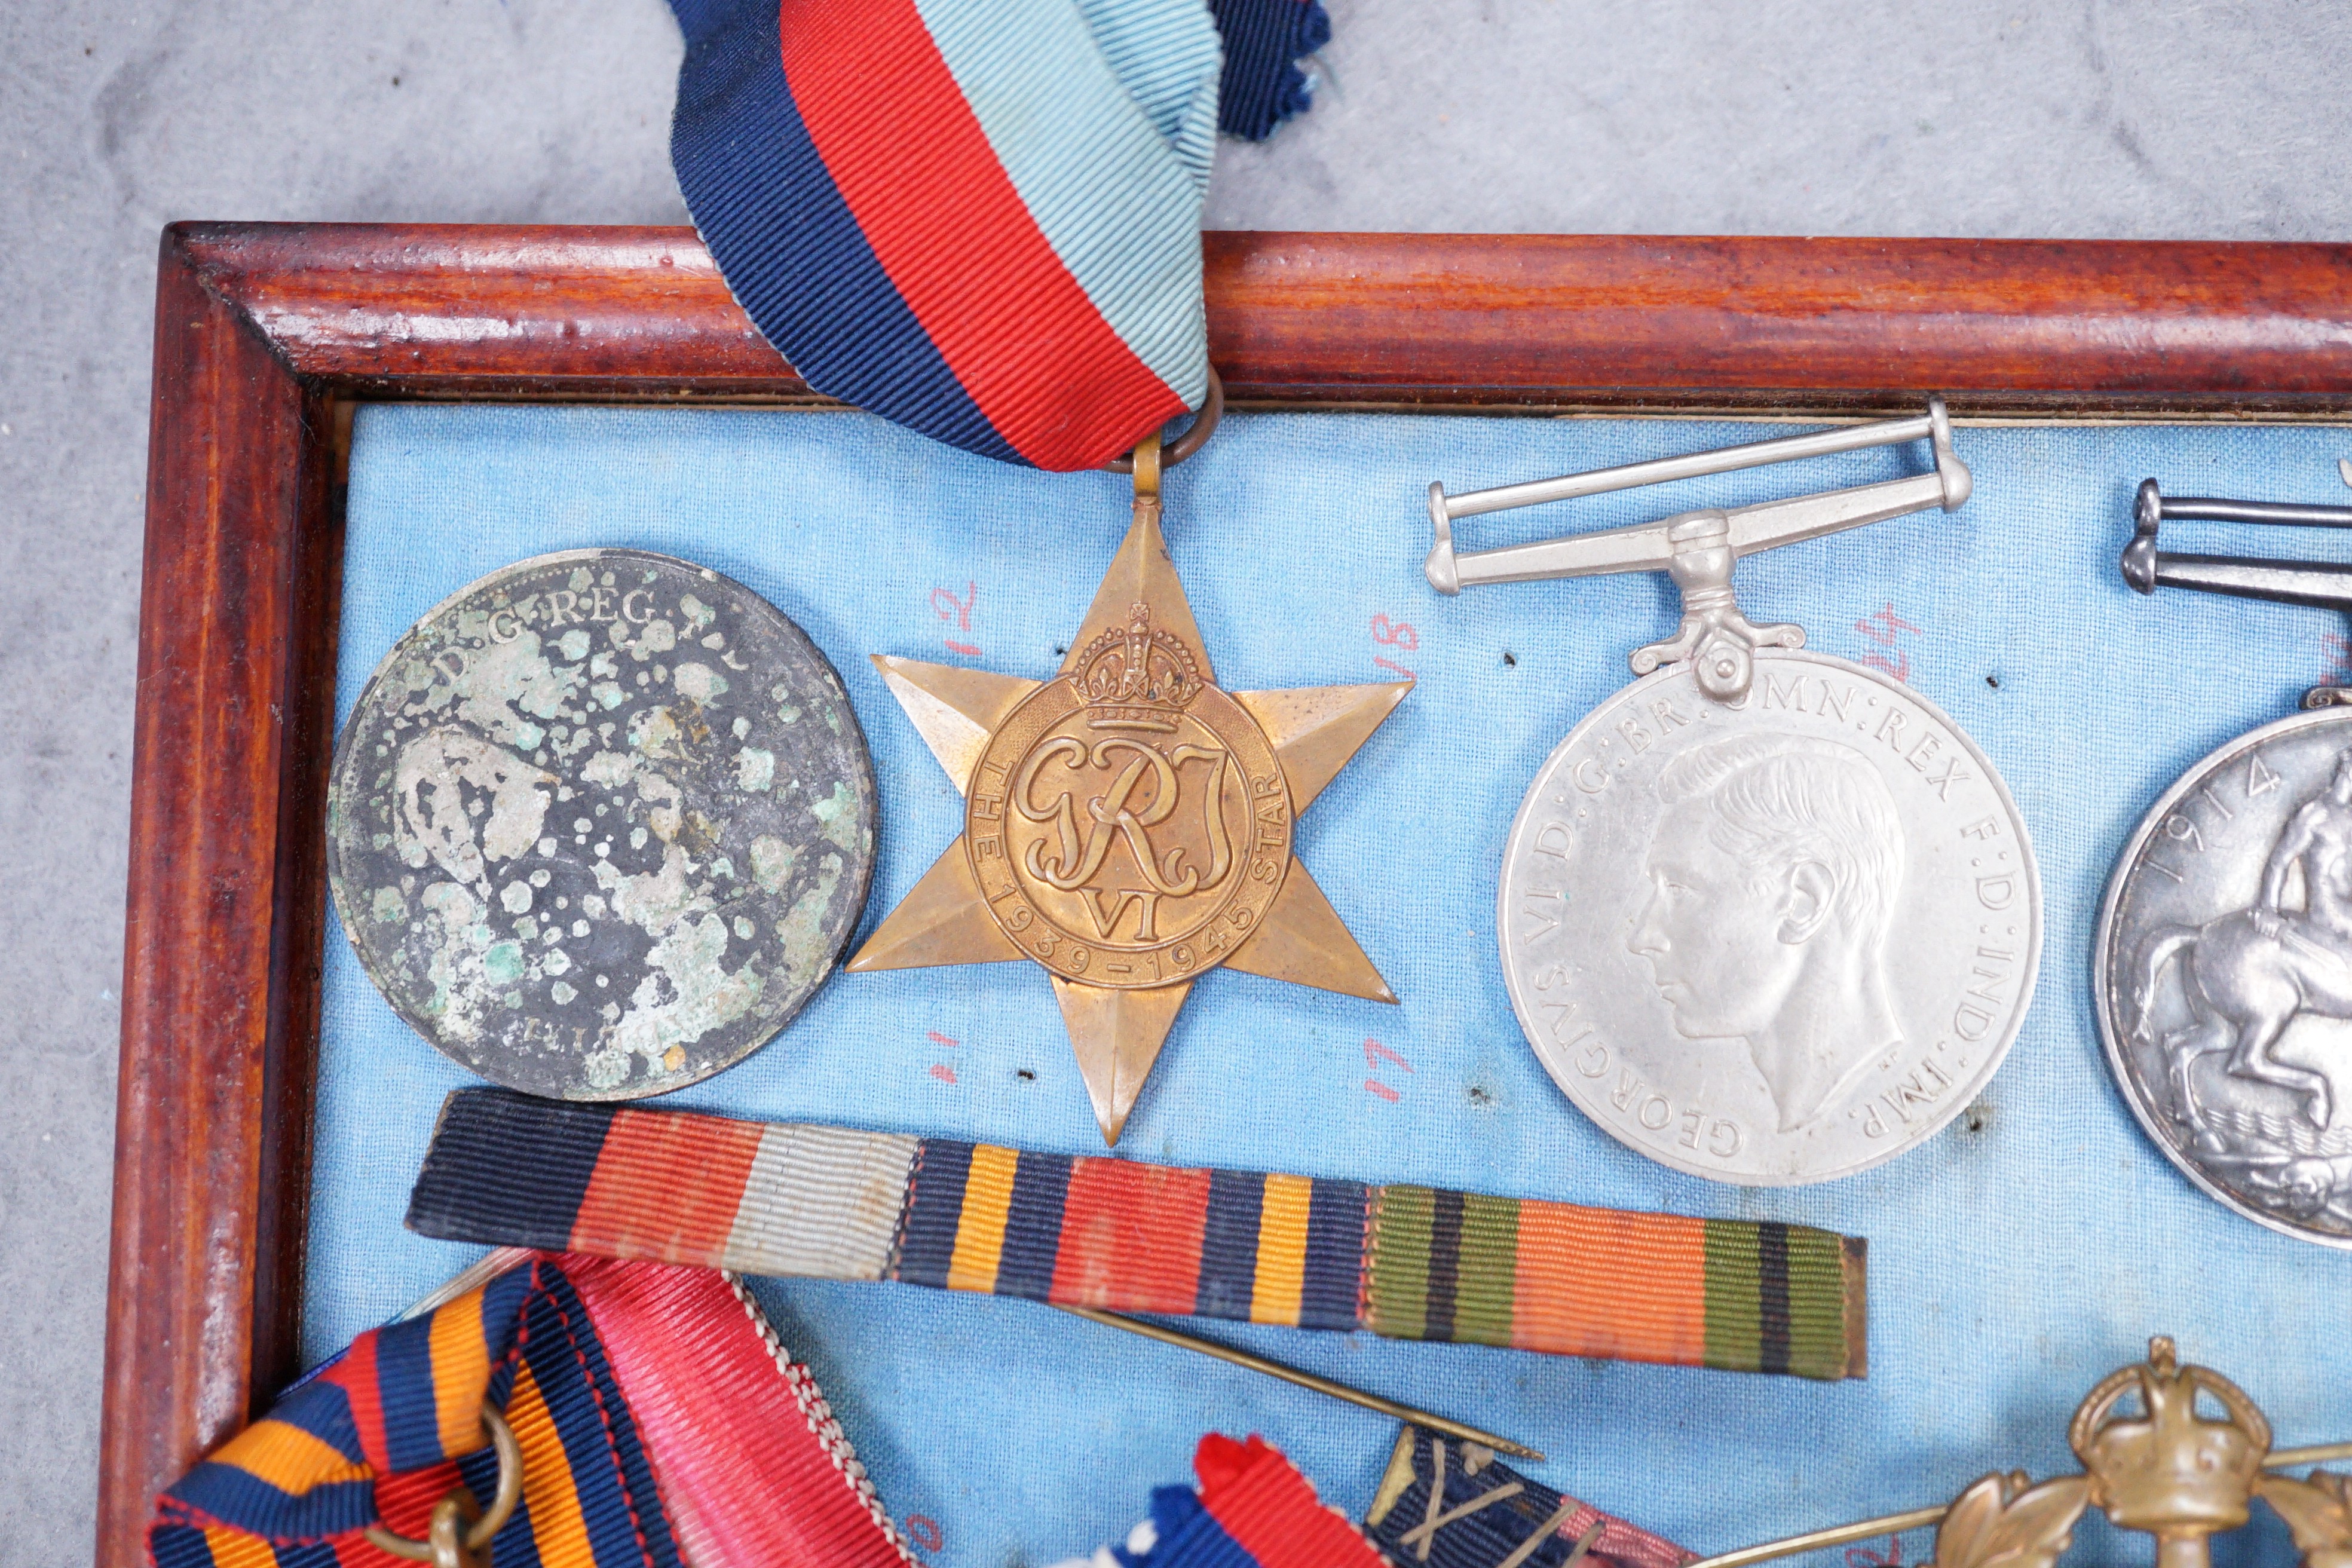 WWI and WWII medals, 11746 PTE. H. PEARCE. R. LANC. R.